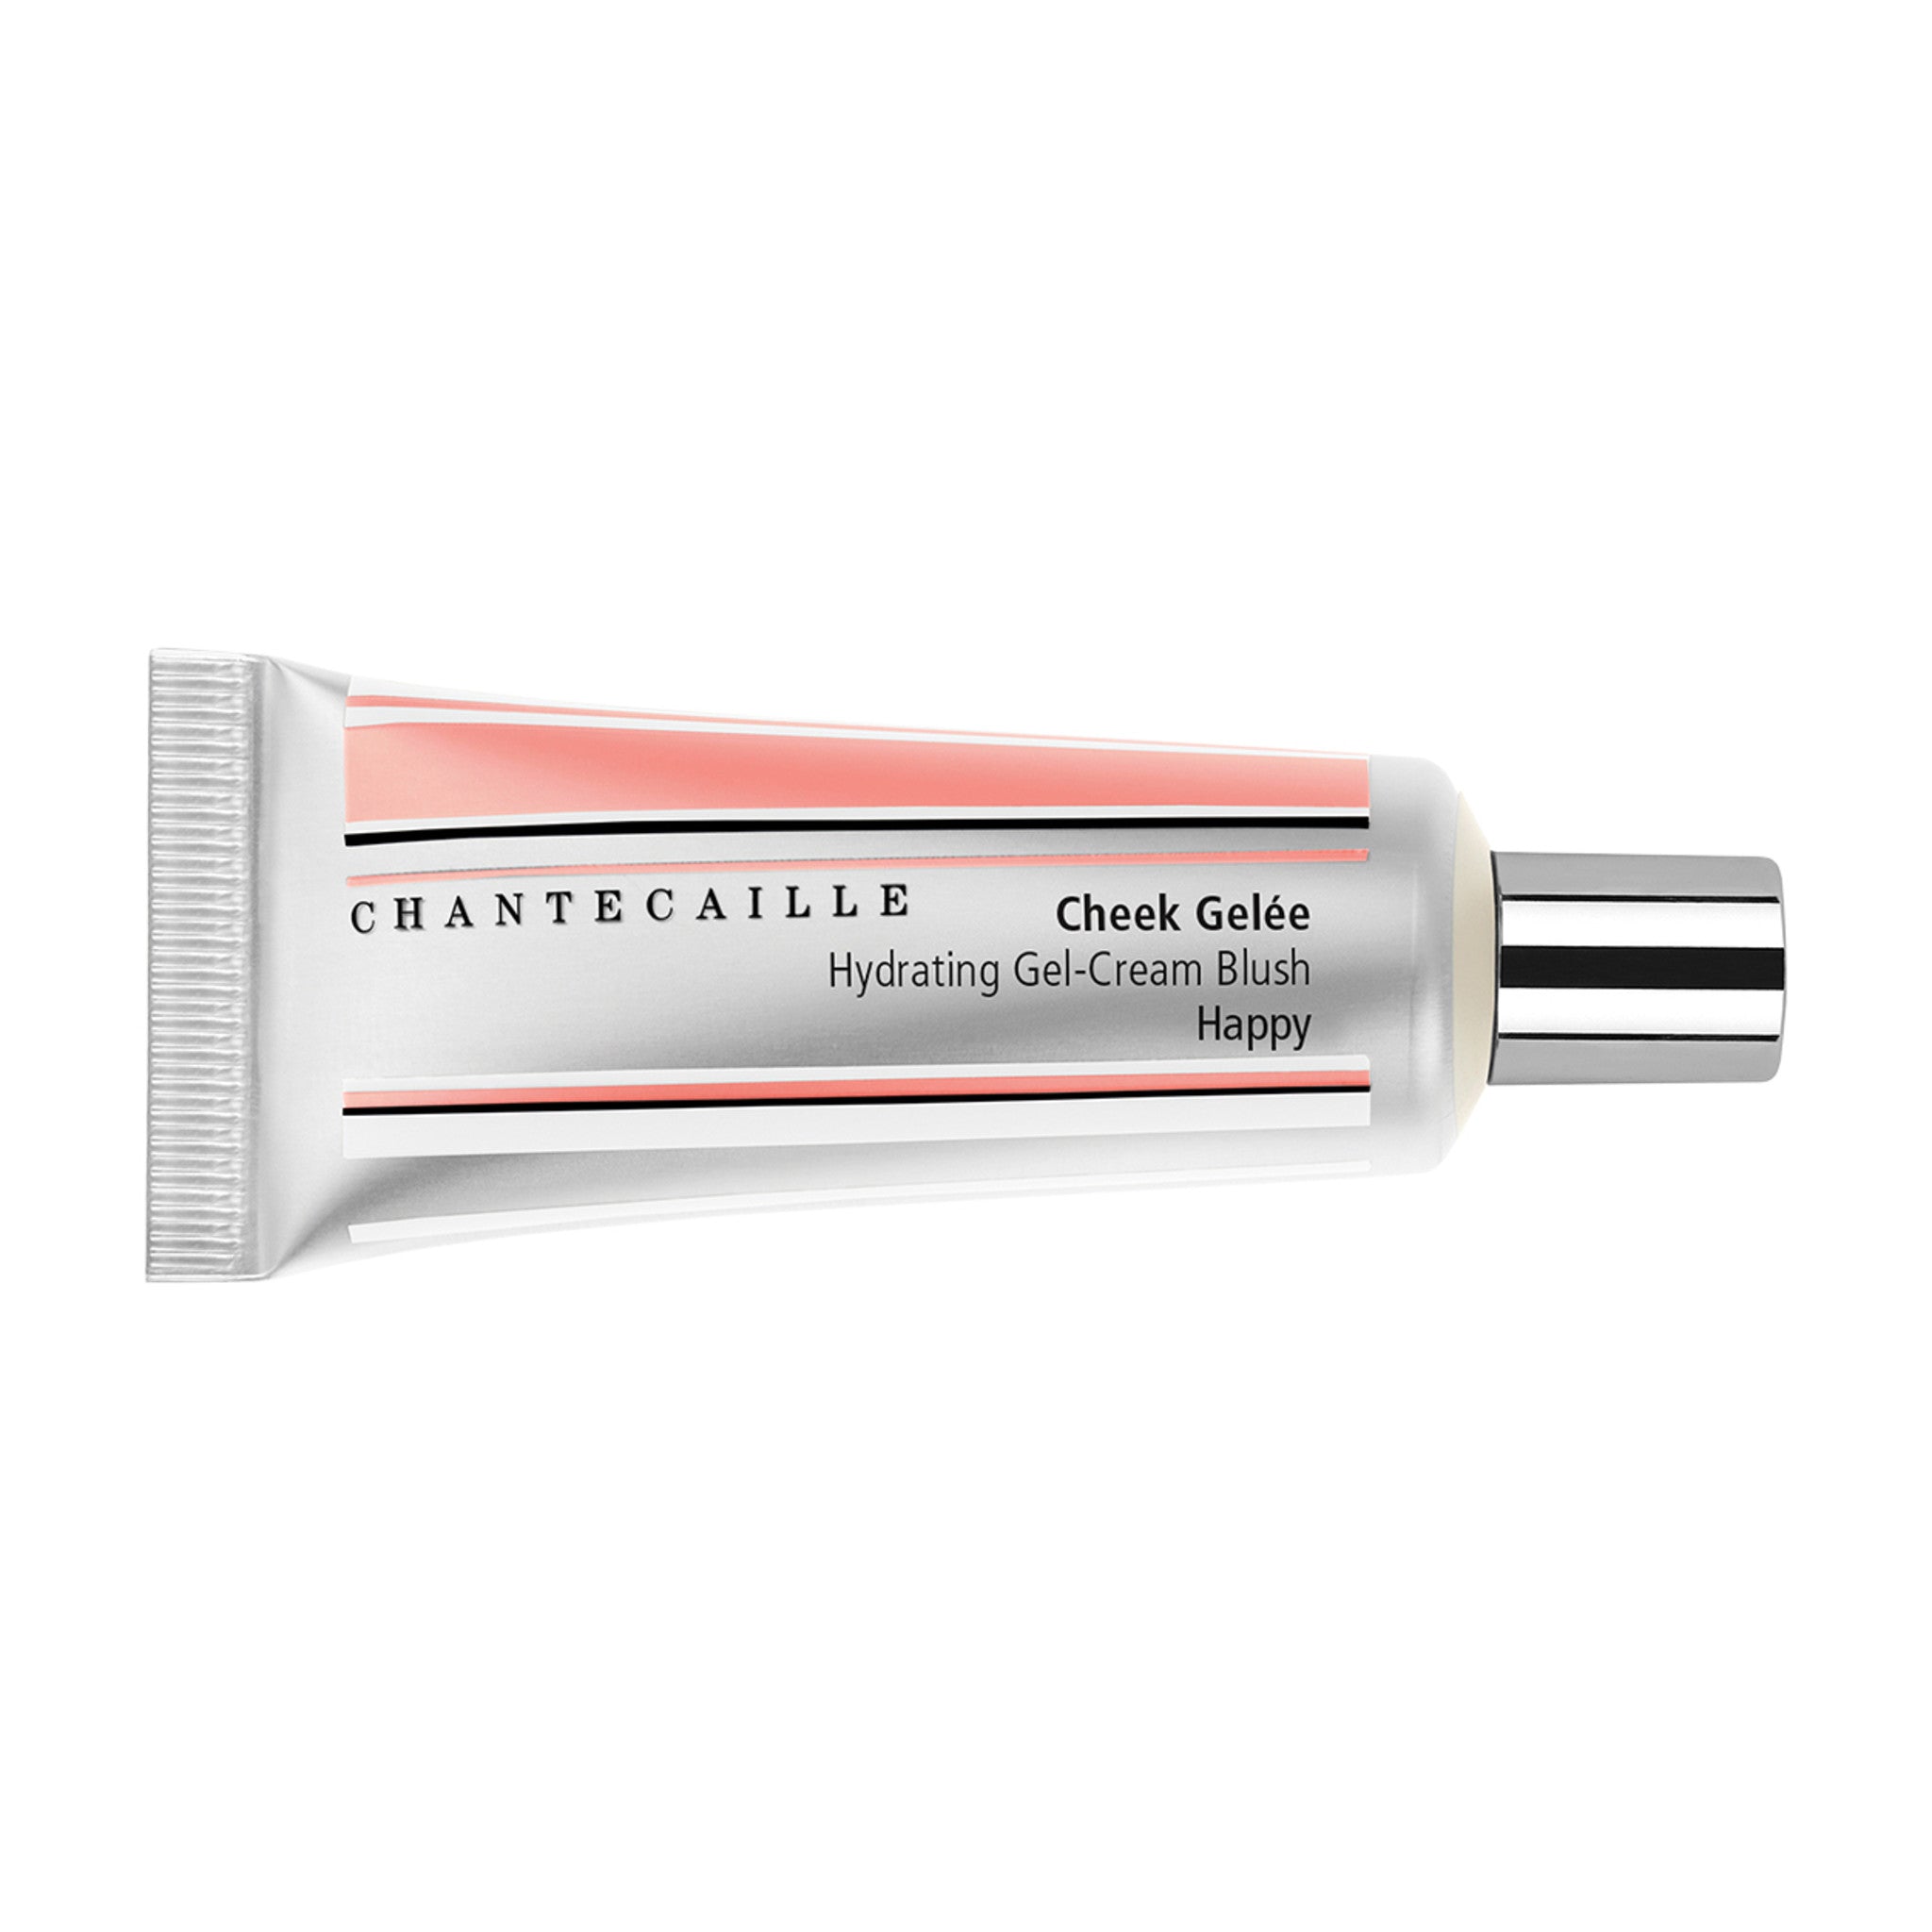 Chantecaille Cheek Gelee Color/Shade variant: Happy main image. This product is in the color pink